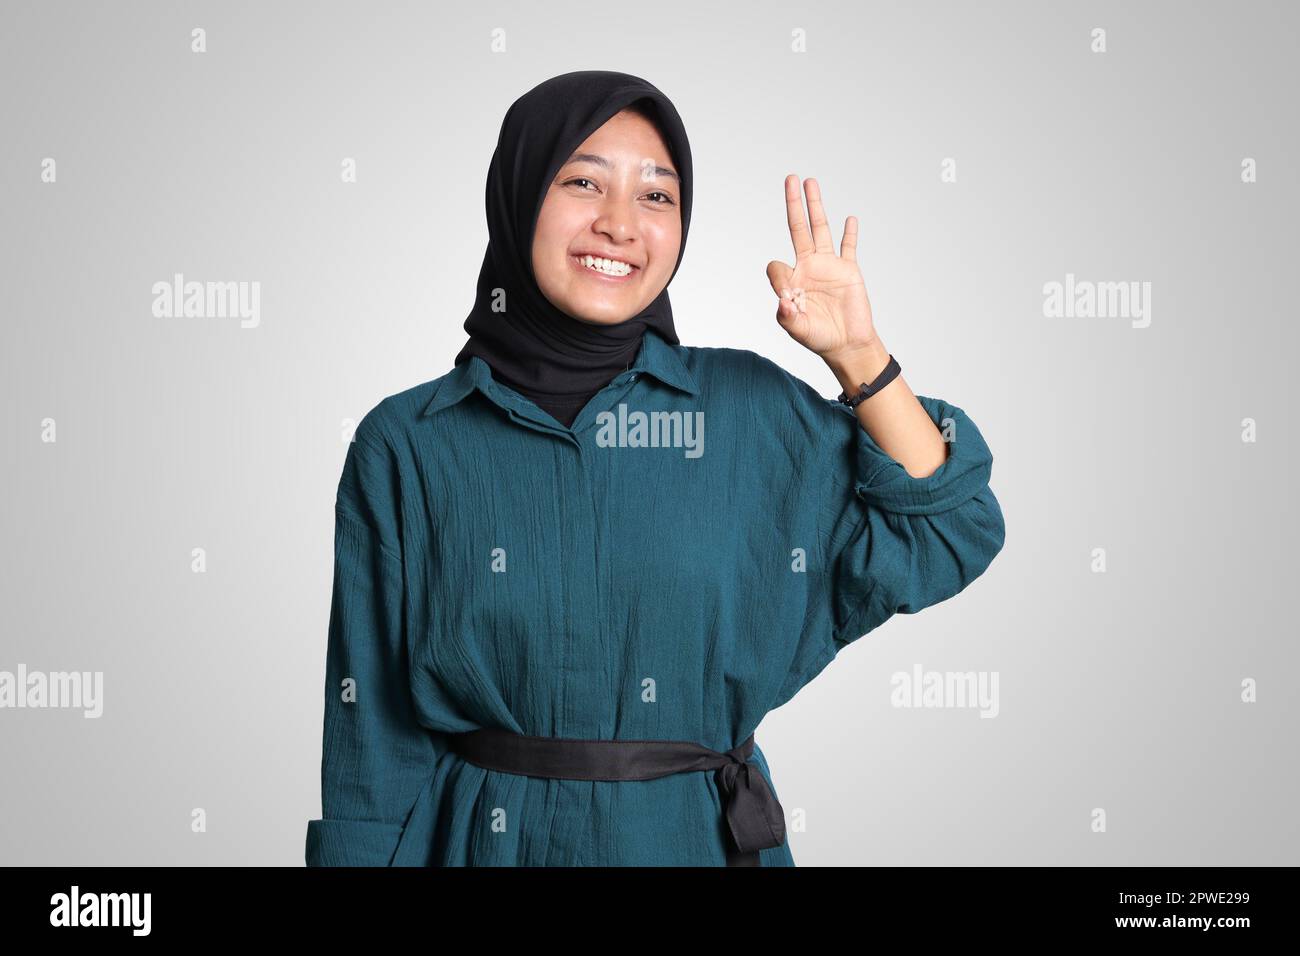 Portrait of excited Asian muslim woman with hijab showing ok hand gesture and smiling looking at camera. Advertising concept. Isolated image on white Stock Photo